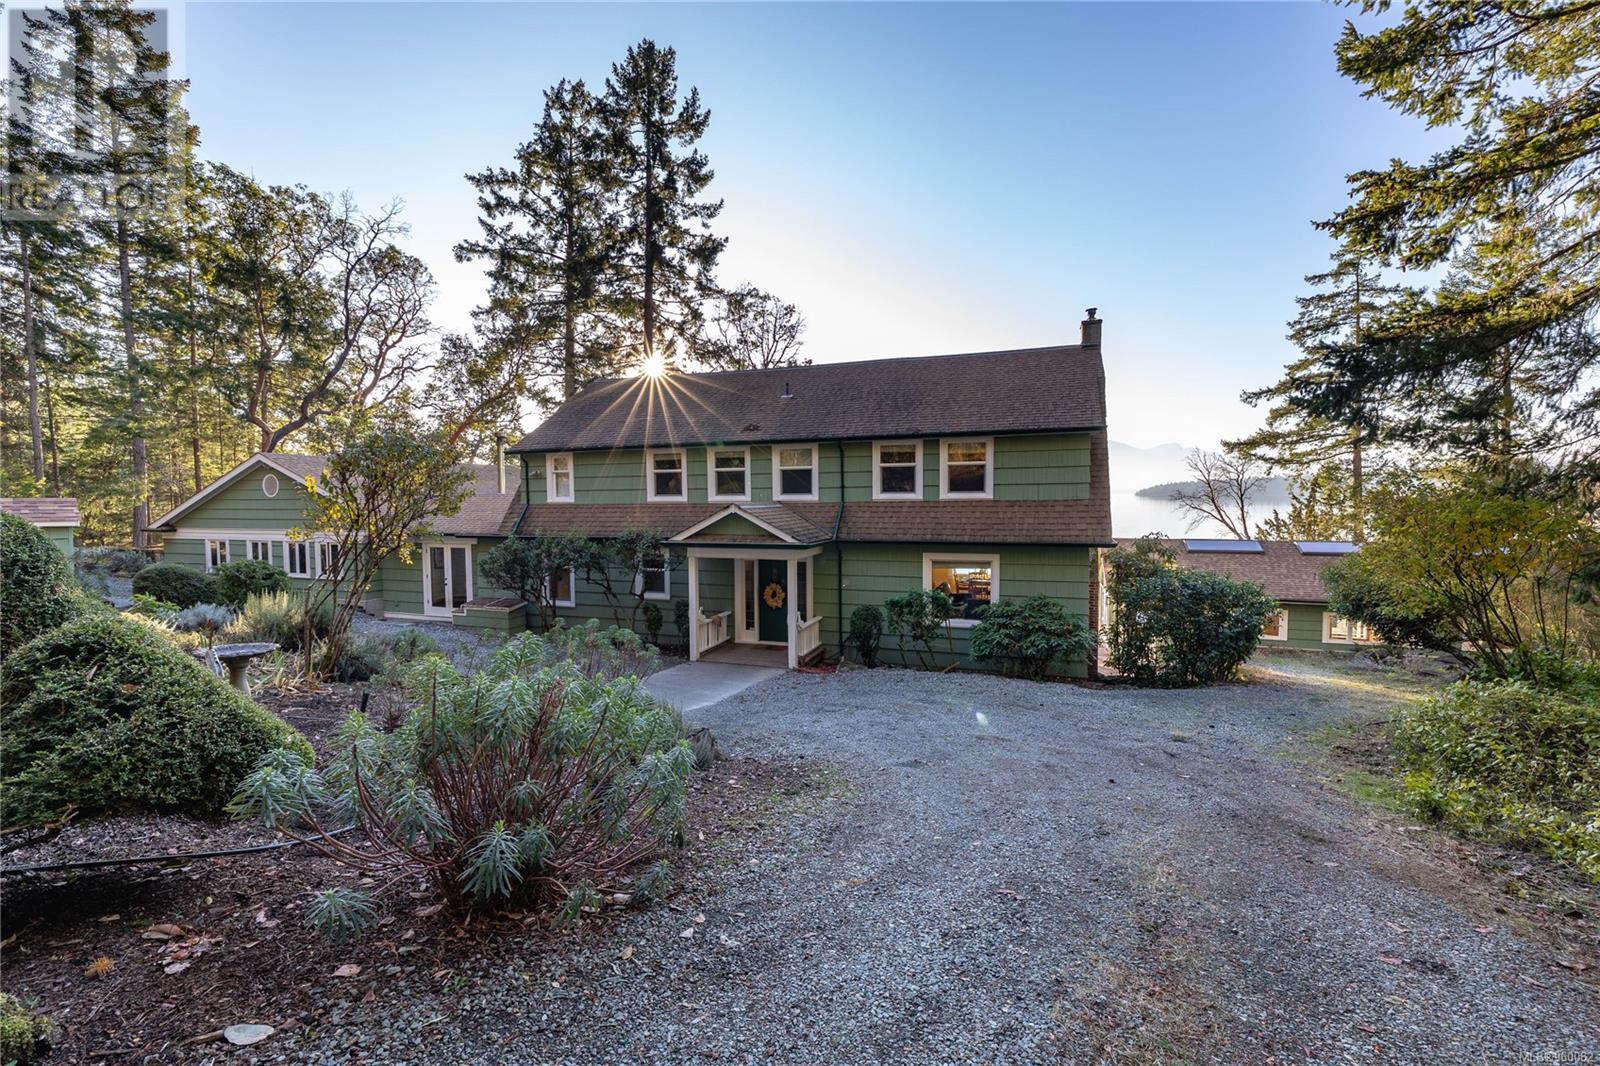 2860 Southey Point Rd, salt spring, British Columbia